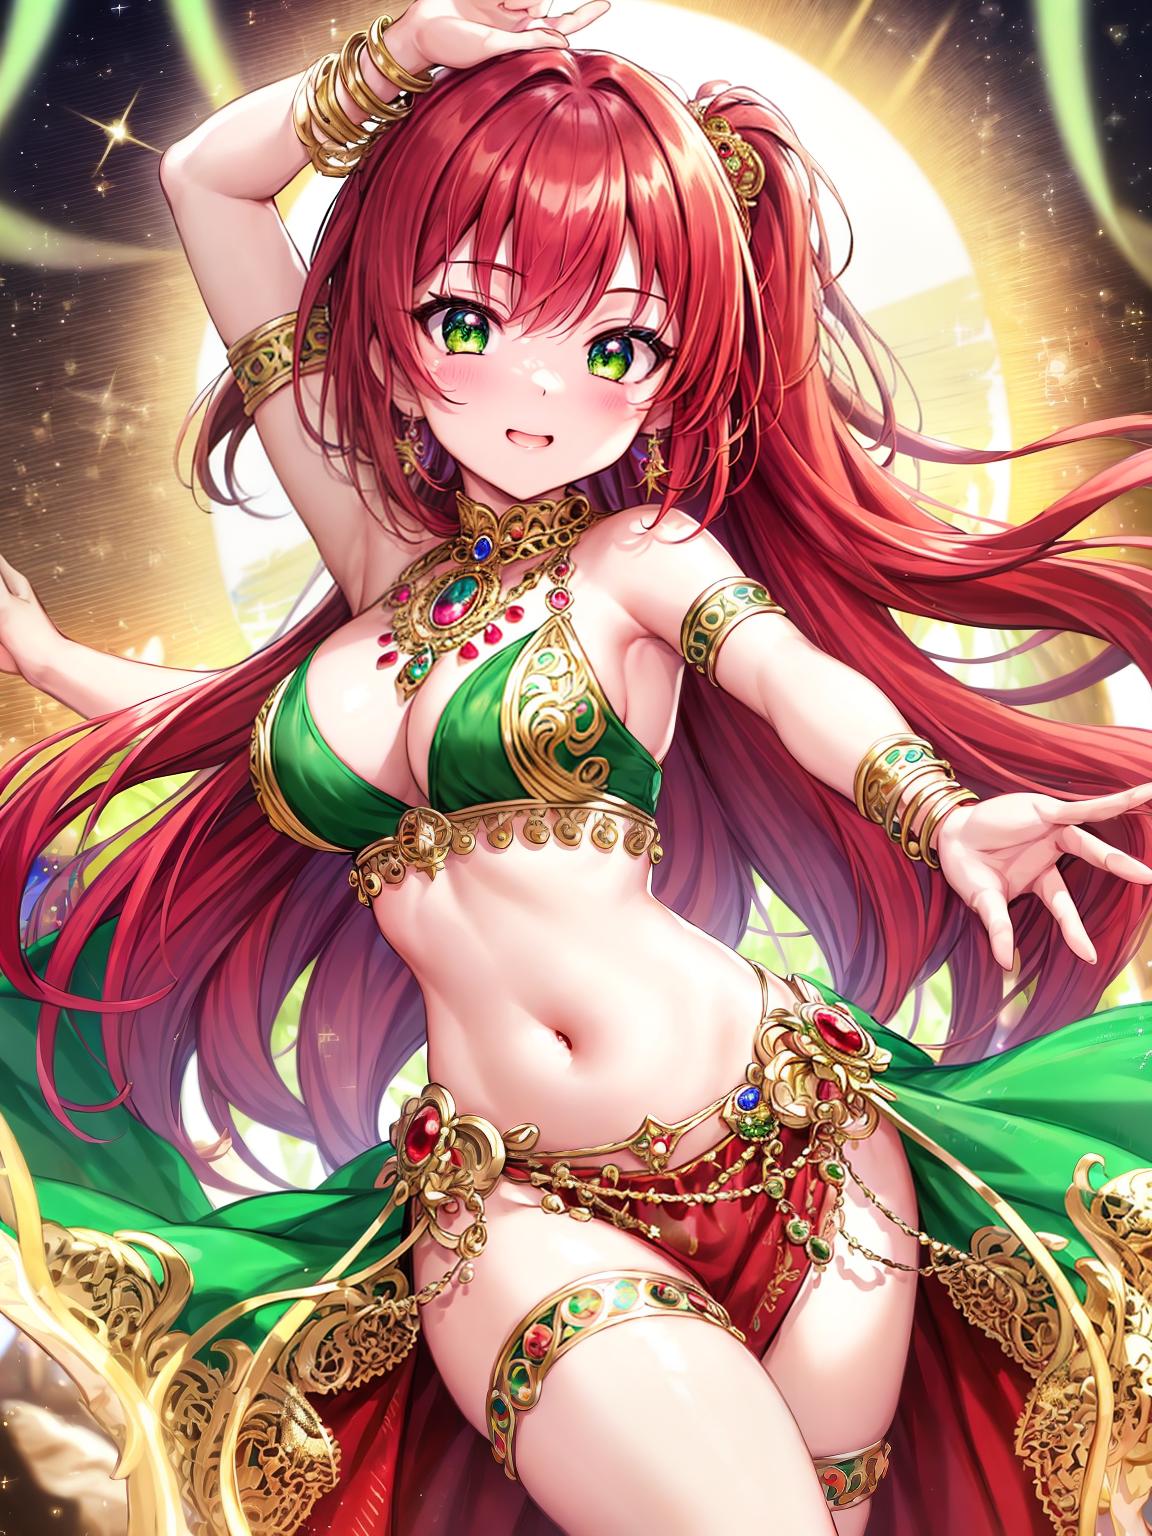  master piece, best quality, ultra detailed, highres, 4k.8k, Chibi character., Posing for a bust shot., Cute face with green eyes., BREAK Red haired dancer in Arabian costume., Dance stage., Belly dancer costume, veils, and ornate jewelry., BREAK Joyful and energetic., Soft lighting, vibrant colors, and whimsical sparkles.,